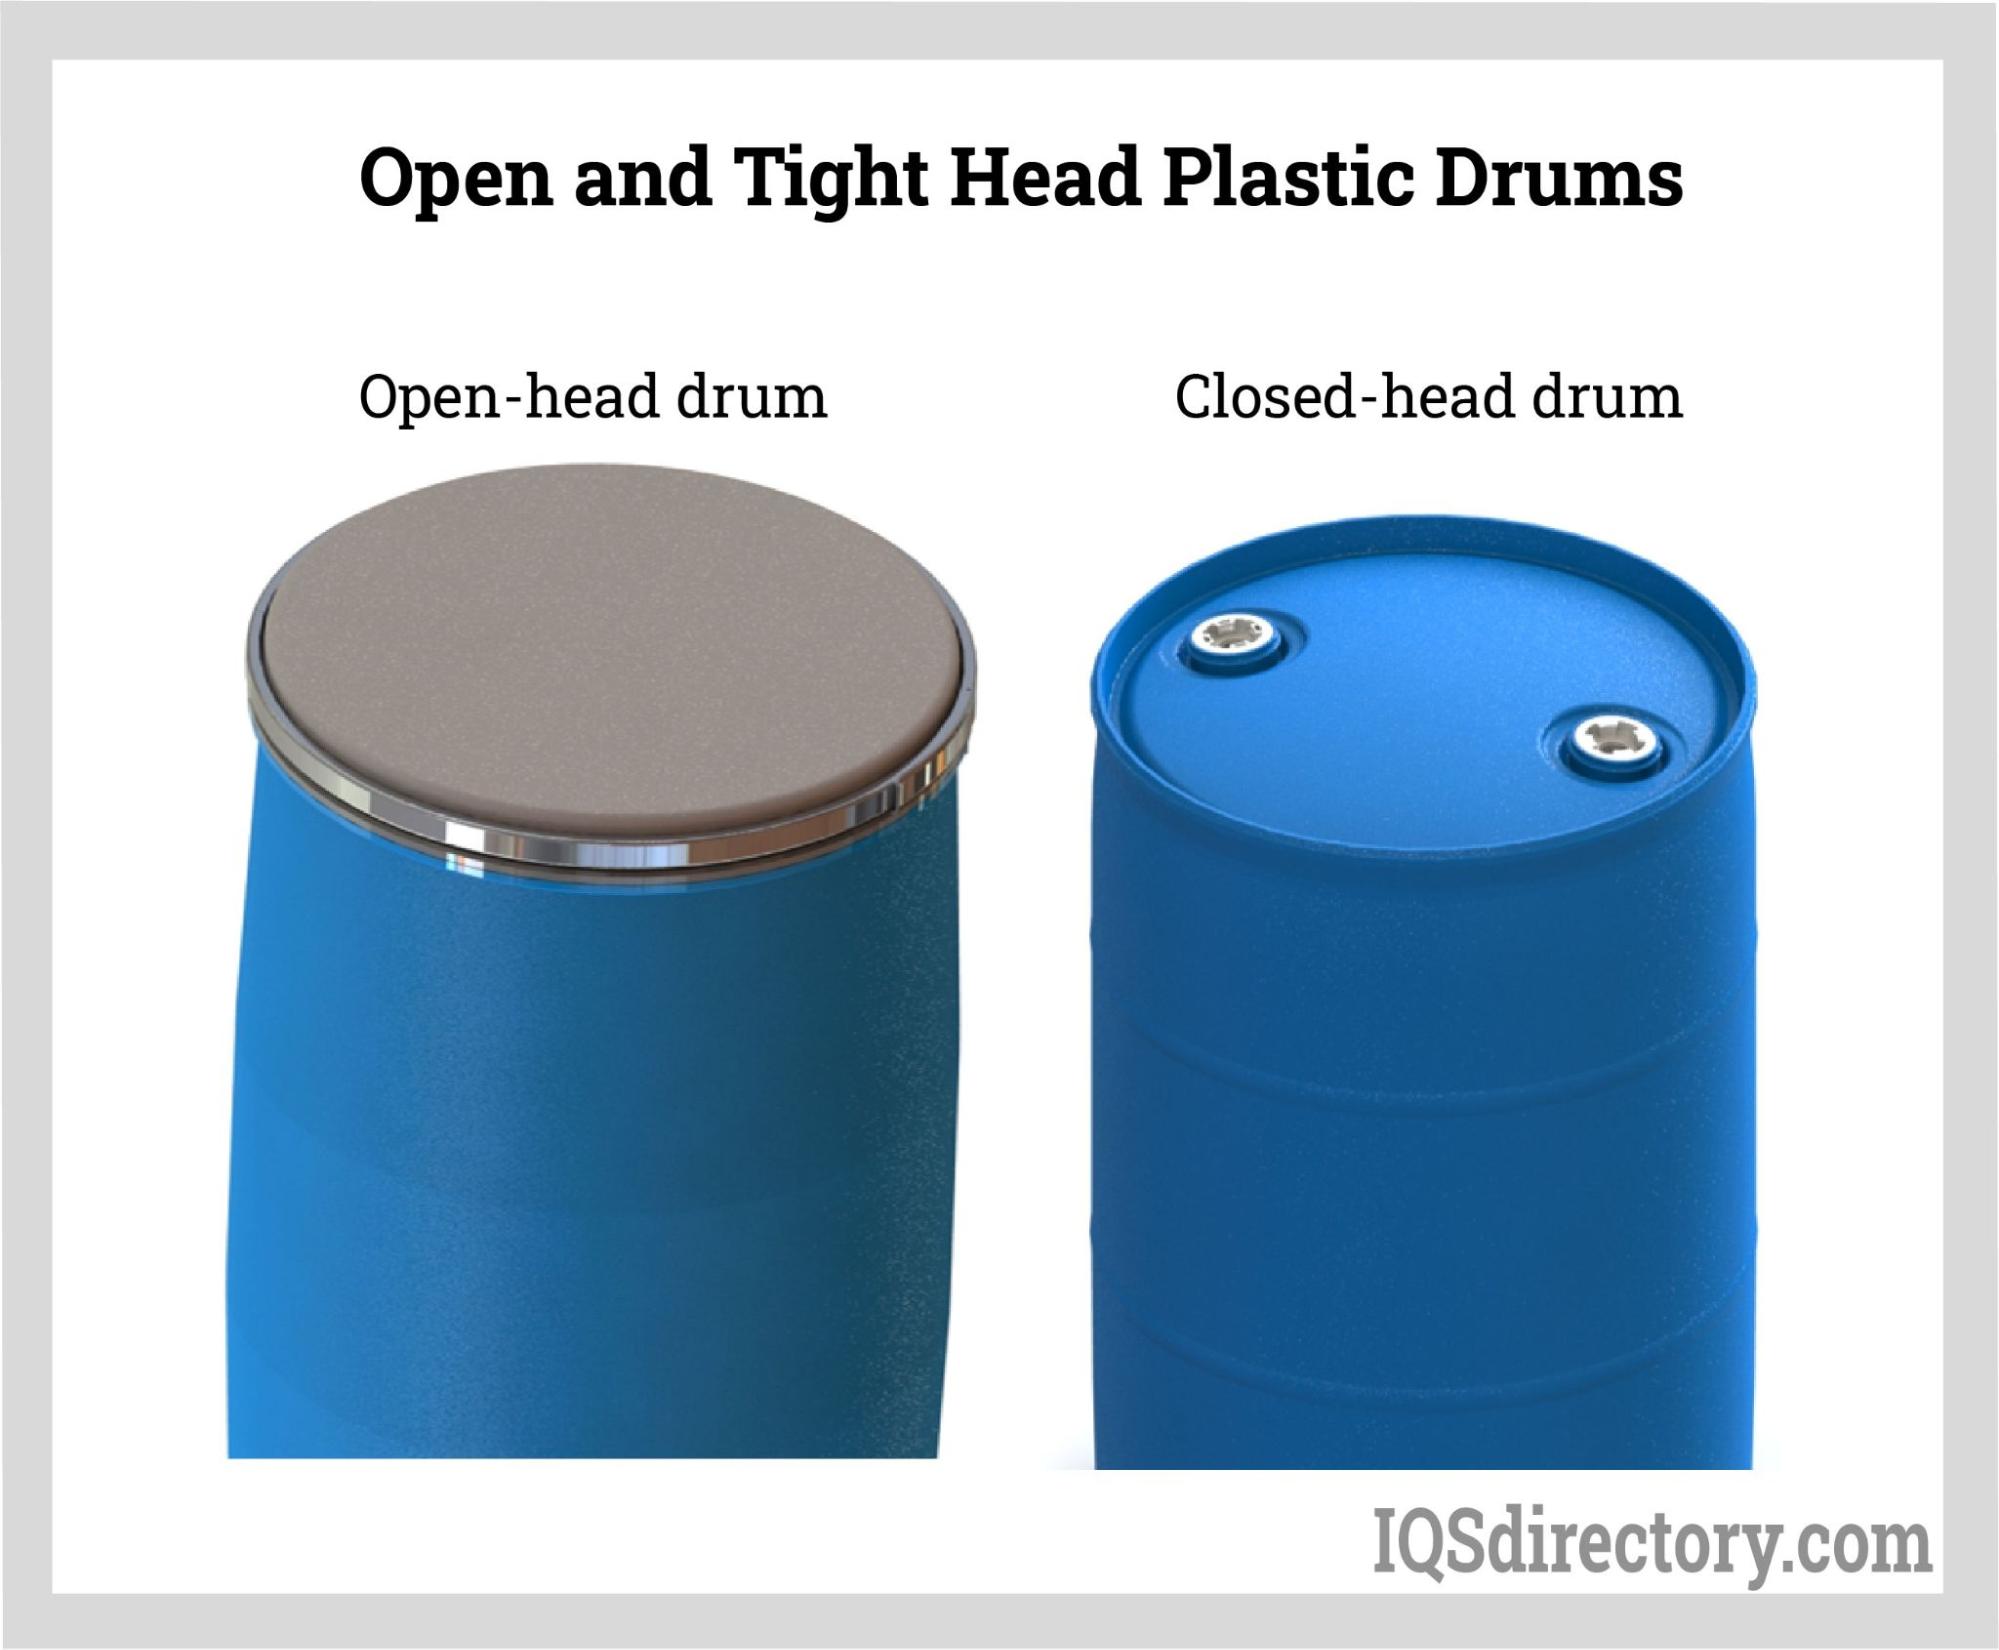 Open and Tight Head Plastic Drums